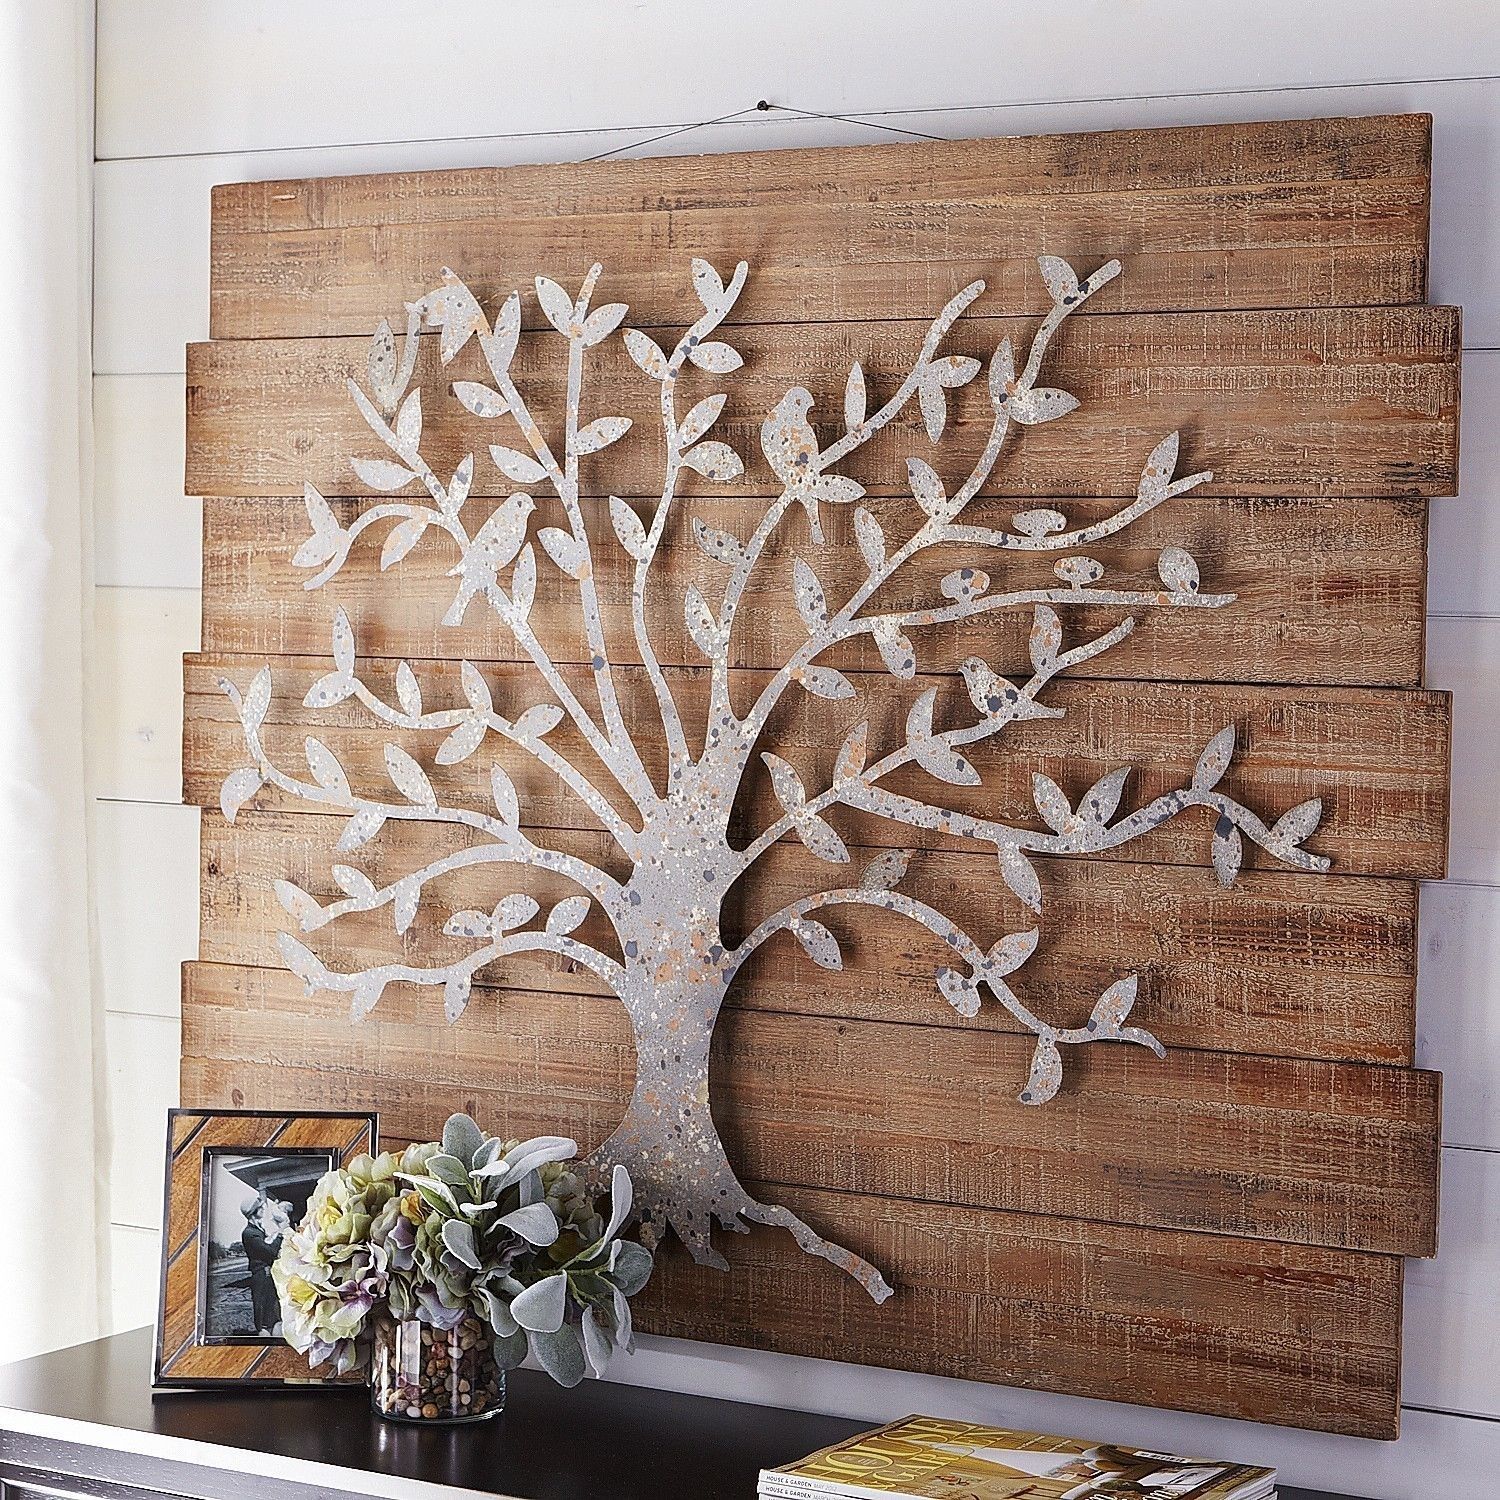 Timeless Tree Wall Decor | Pier 1 Imports … | Metal Work In 2018… Throughout Wall Tree Art (View 5 of 20)